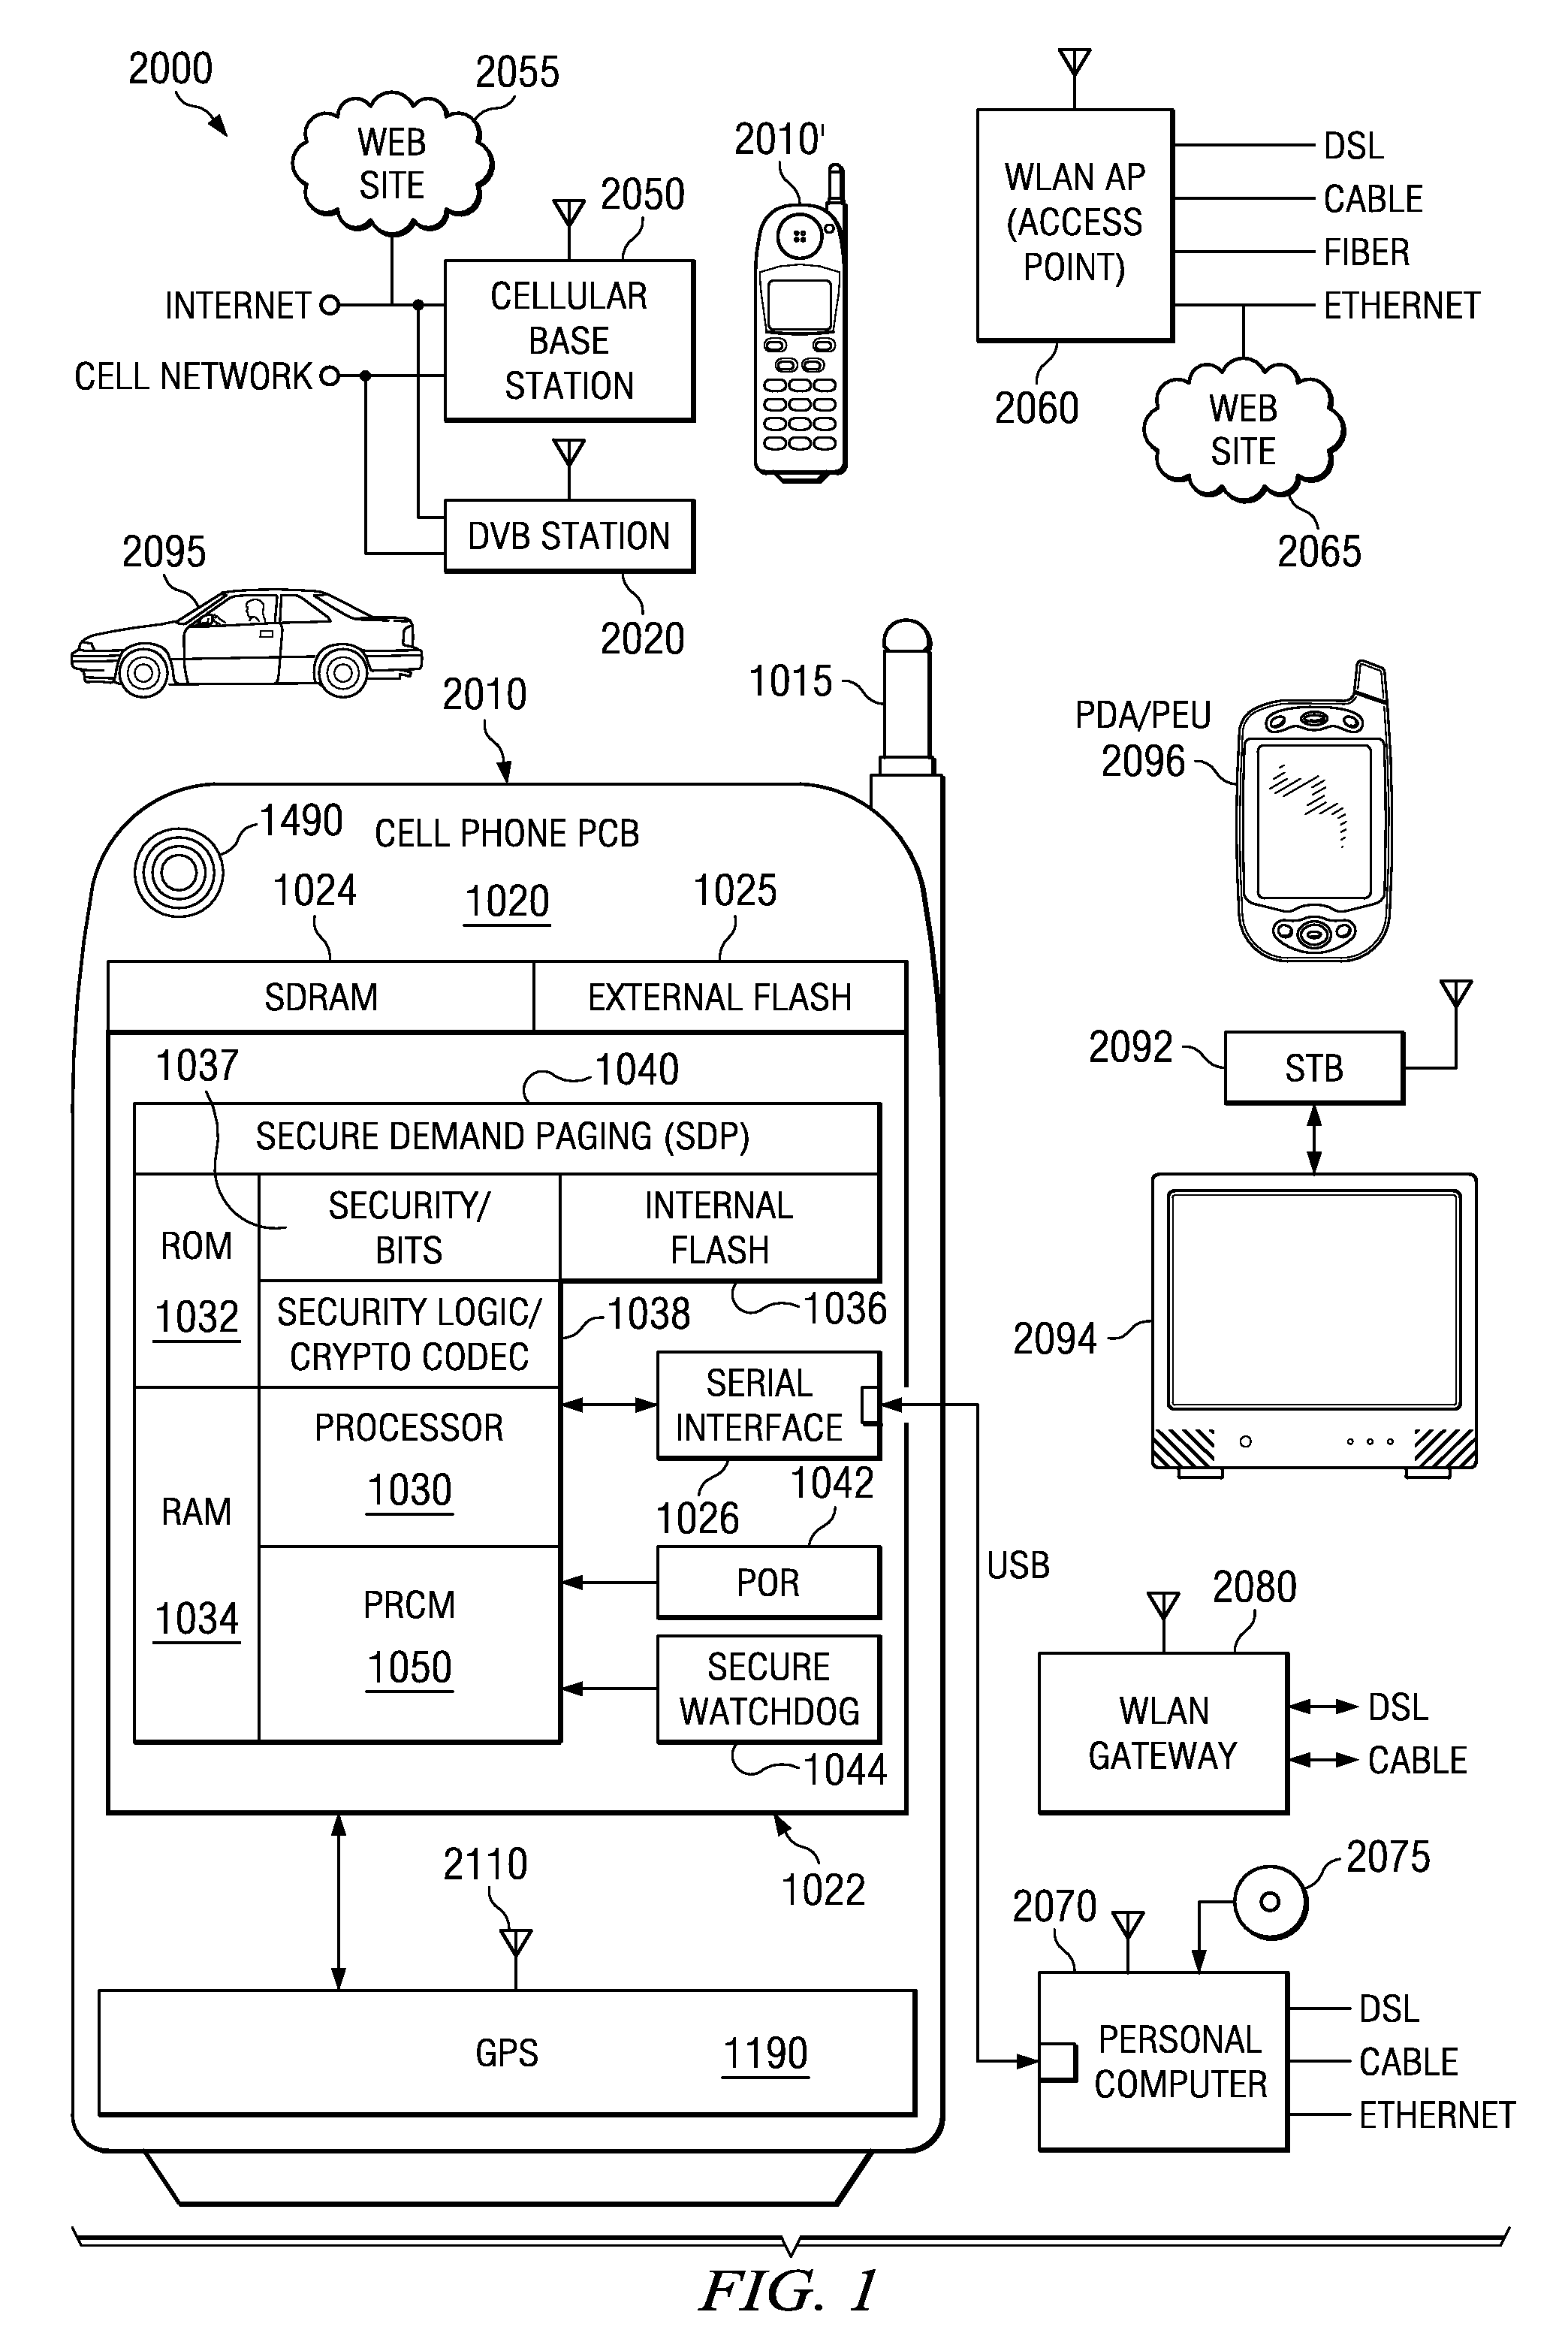 Satellite (GPS) assisted clock apparatus, circuits, systems and processes for cellular terminals on asynchronous networks